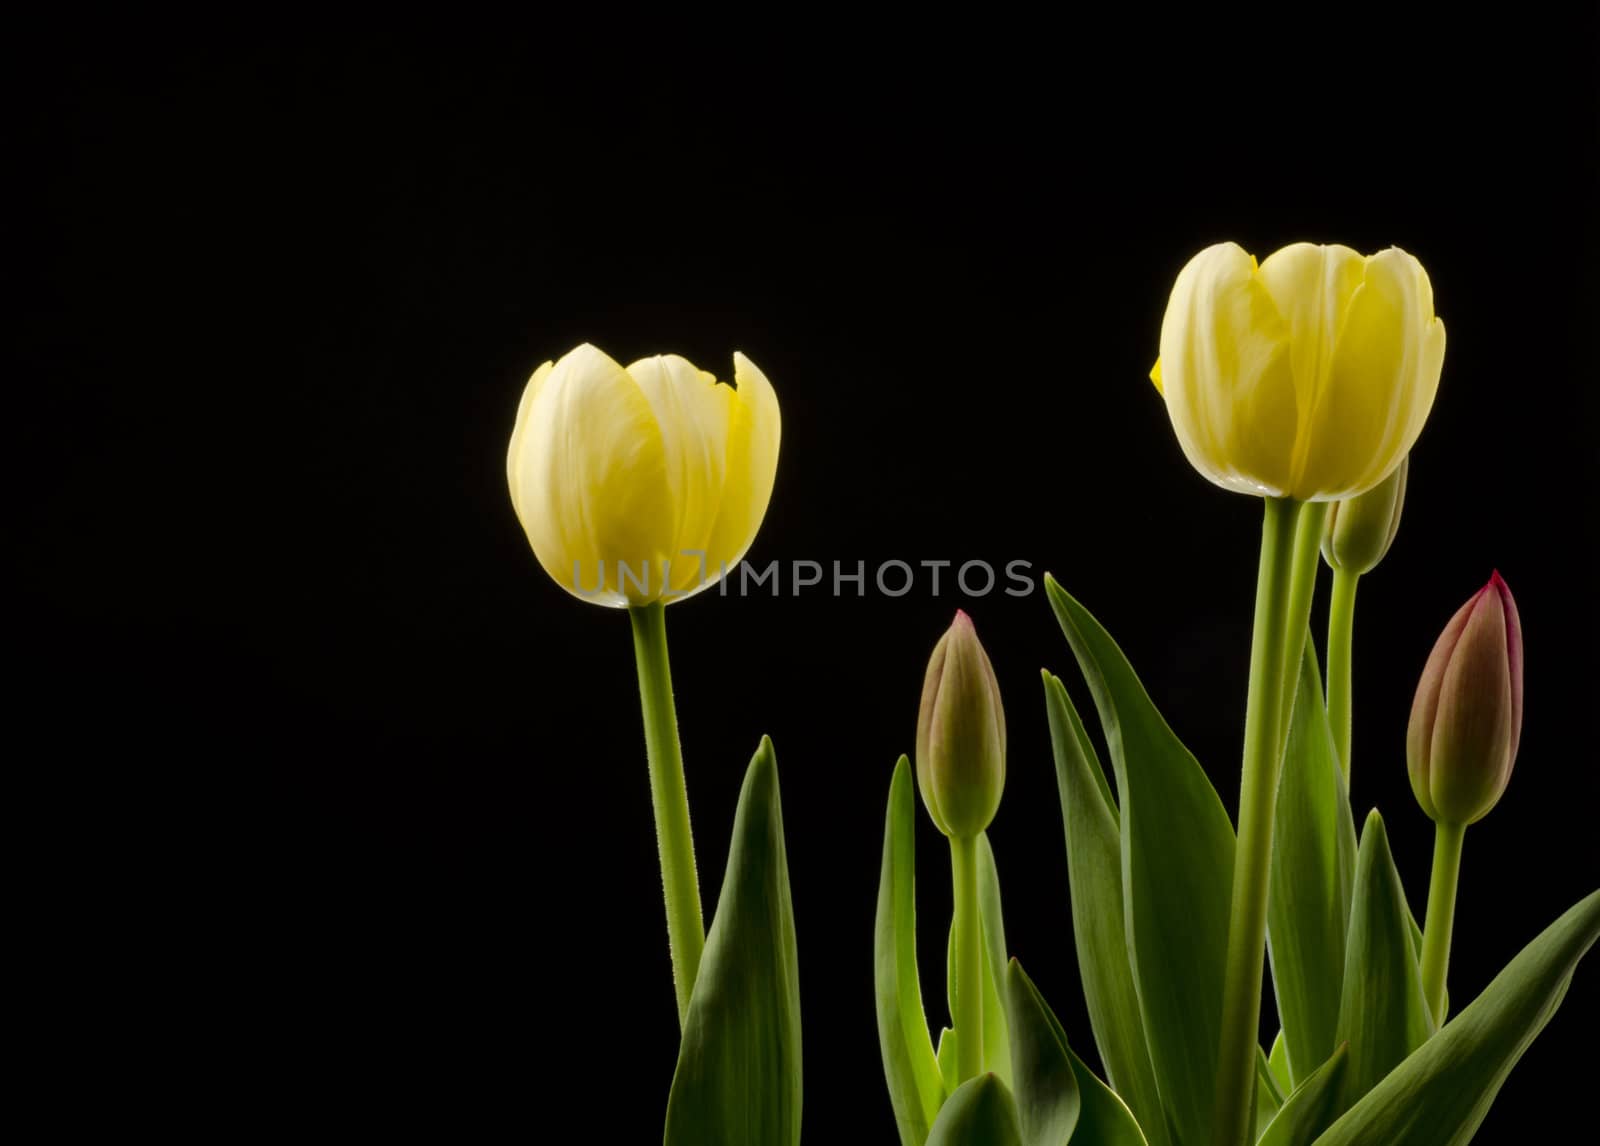 Tulips at different stages of blooming with a black background